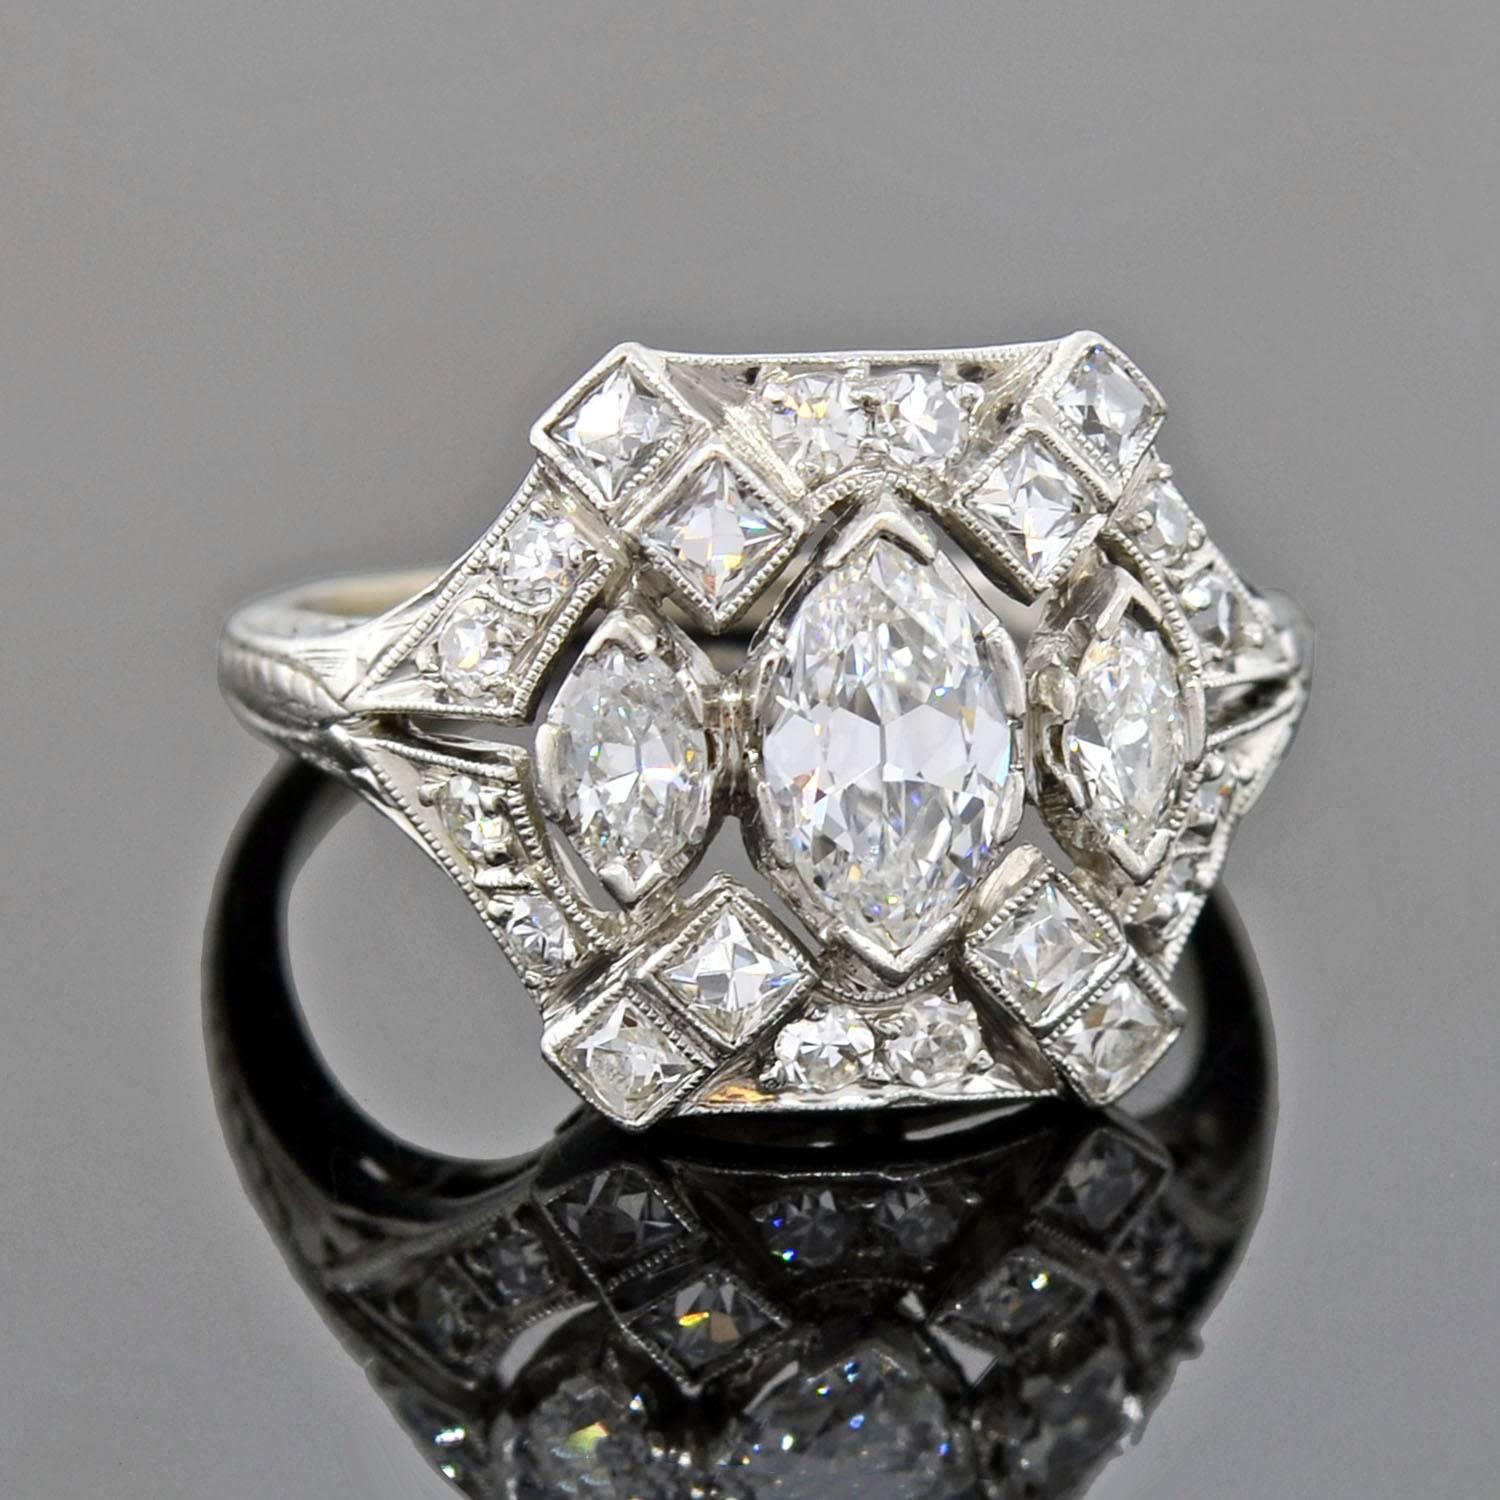 An exquisite diamond ring from the Edwardian (ca1910) era! Made of platinum, this gorgeous ring has an intricate filigree design that features a cluster of sparkling diamonds. Three marquise diamonds are set across the middle, surrounded by an